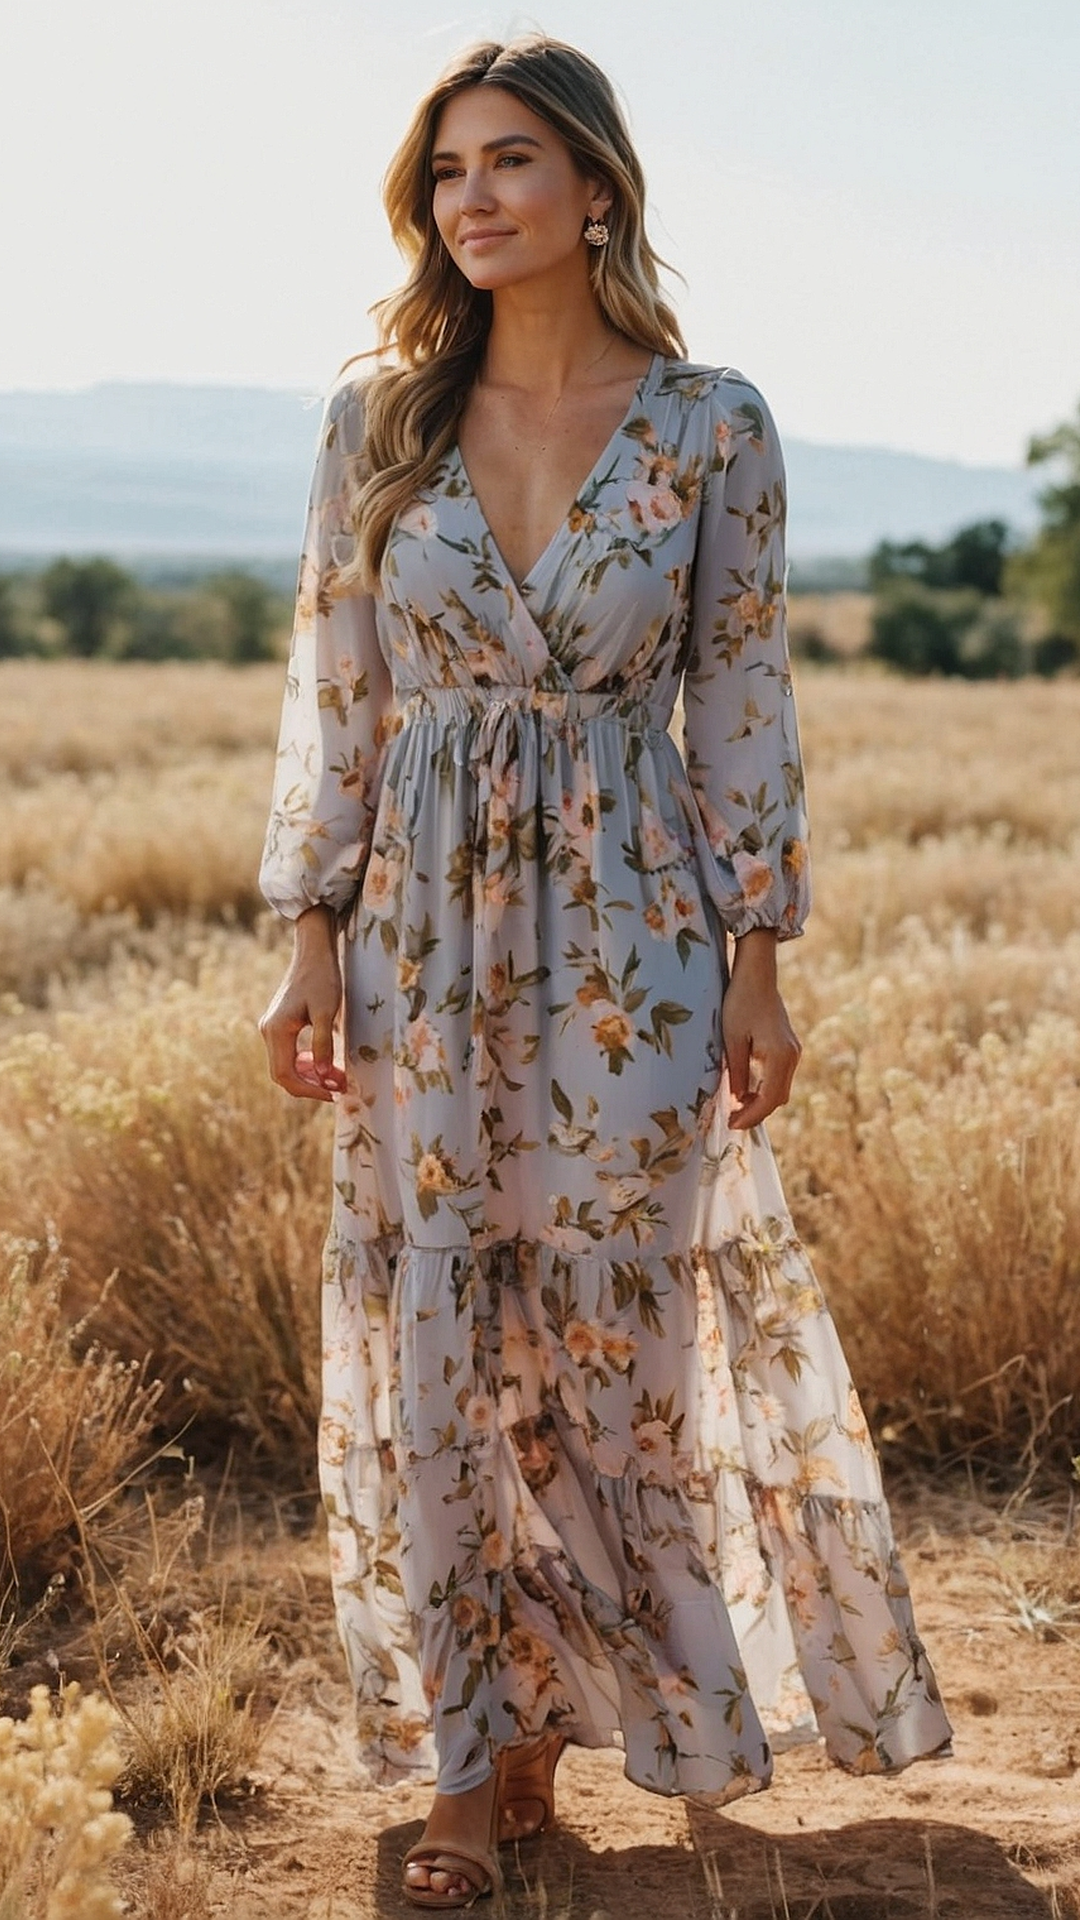 Whimsical Wildflowers: Charming Floral Maxi Dress Displays